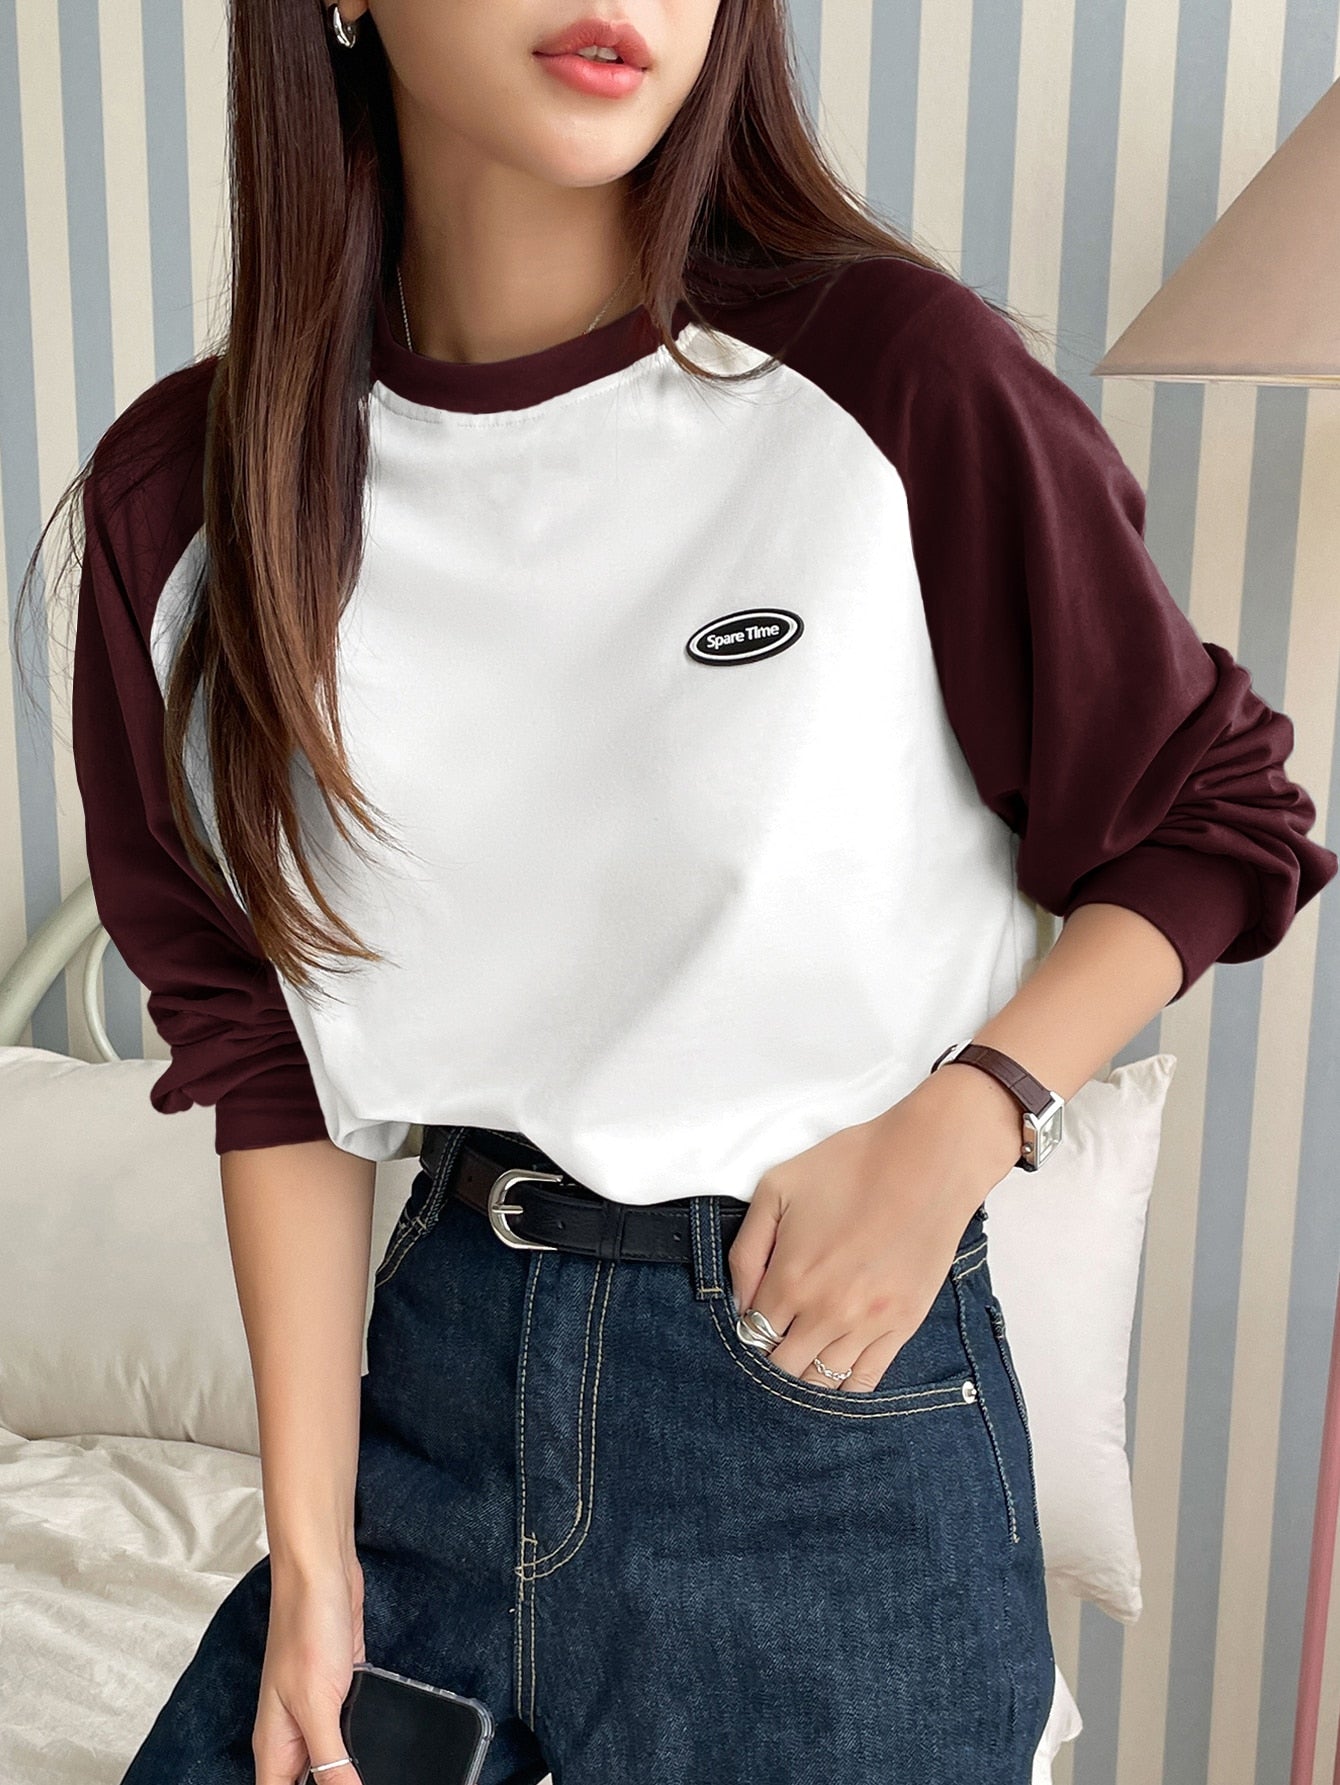 Letter Patched Colorblock Raglan Sleeve Tee